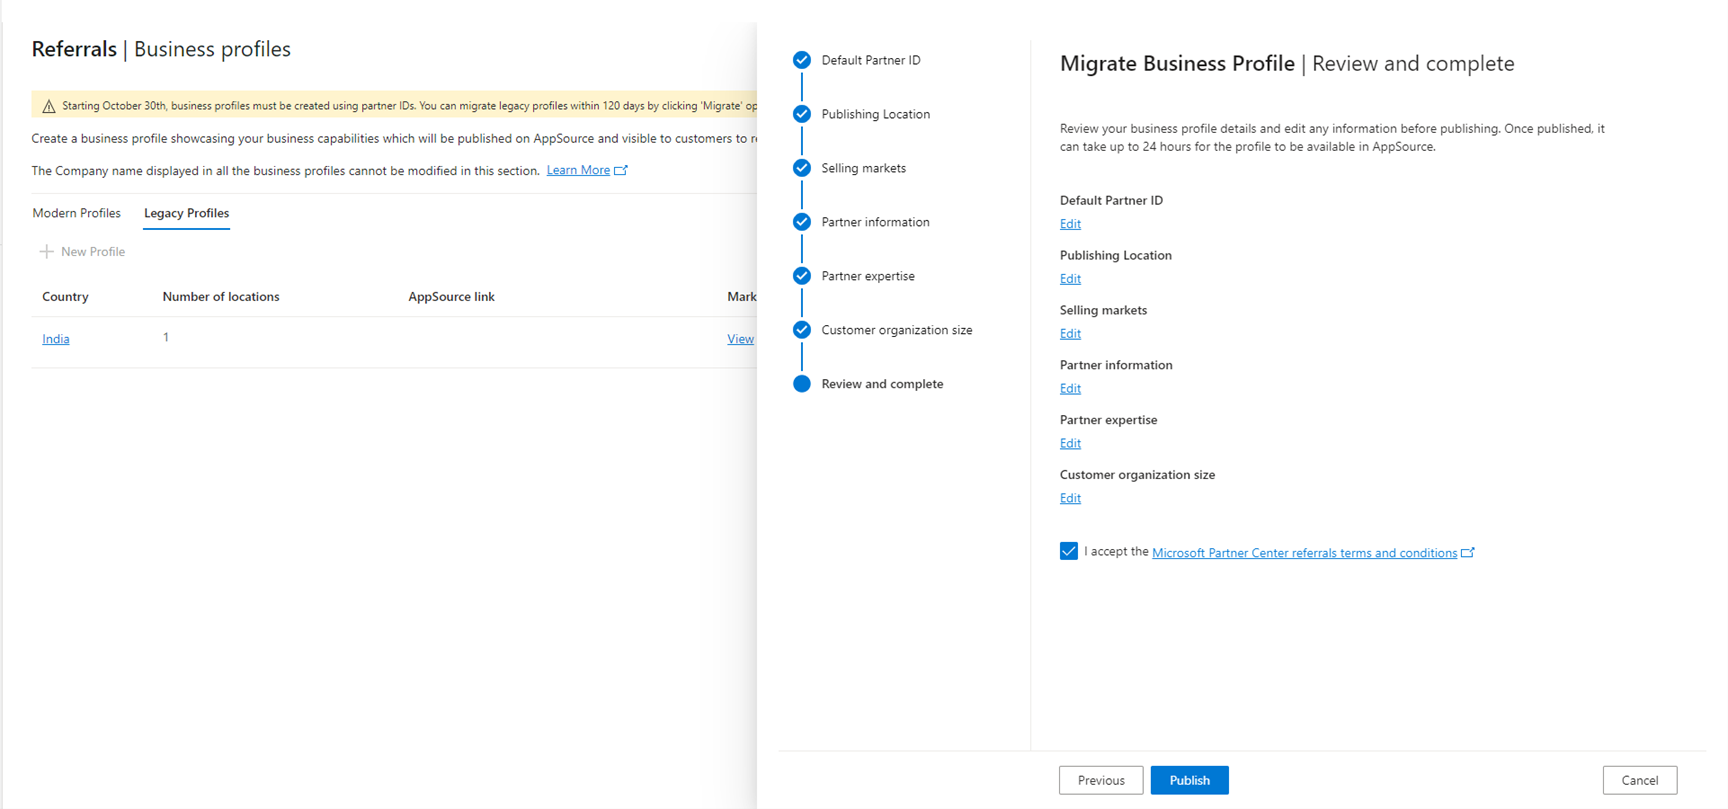 Screenshot of the referrals business page with migration review and complete screen.